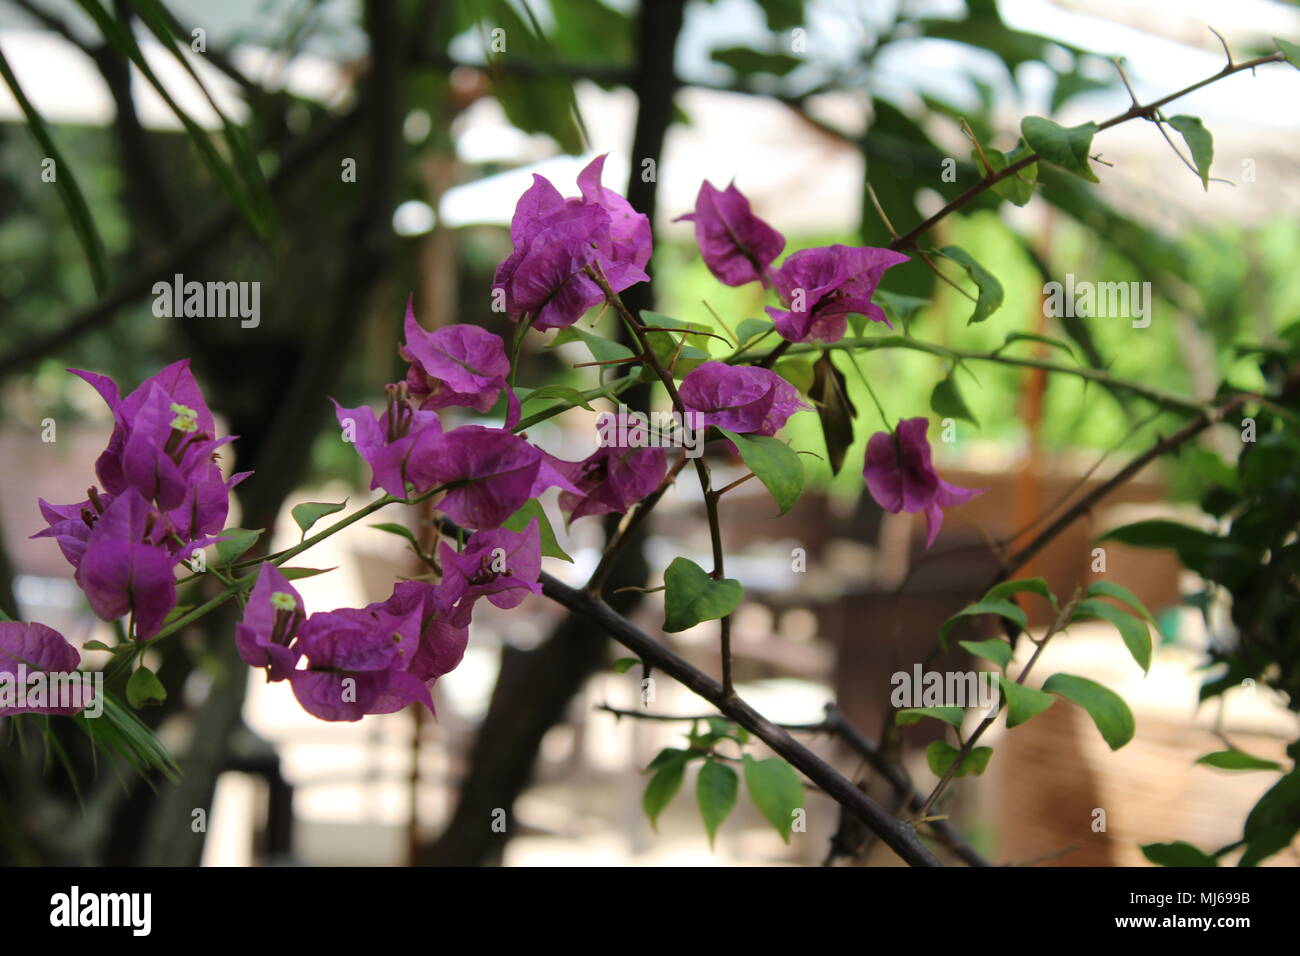 Pink Papery Rose Flower - Bougainvillea spectabilis Willd, Great bougainvillea, Bougainvillea glabra Choisy, Nyctaginaceae, Paper-flower, Leela Palace Stock Photo